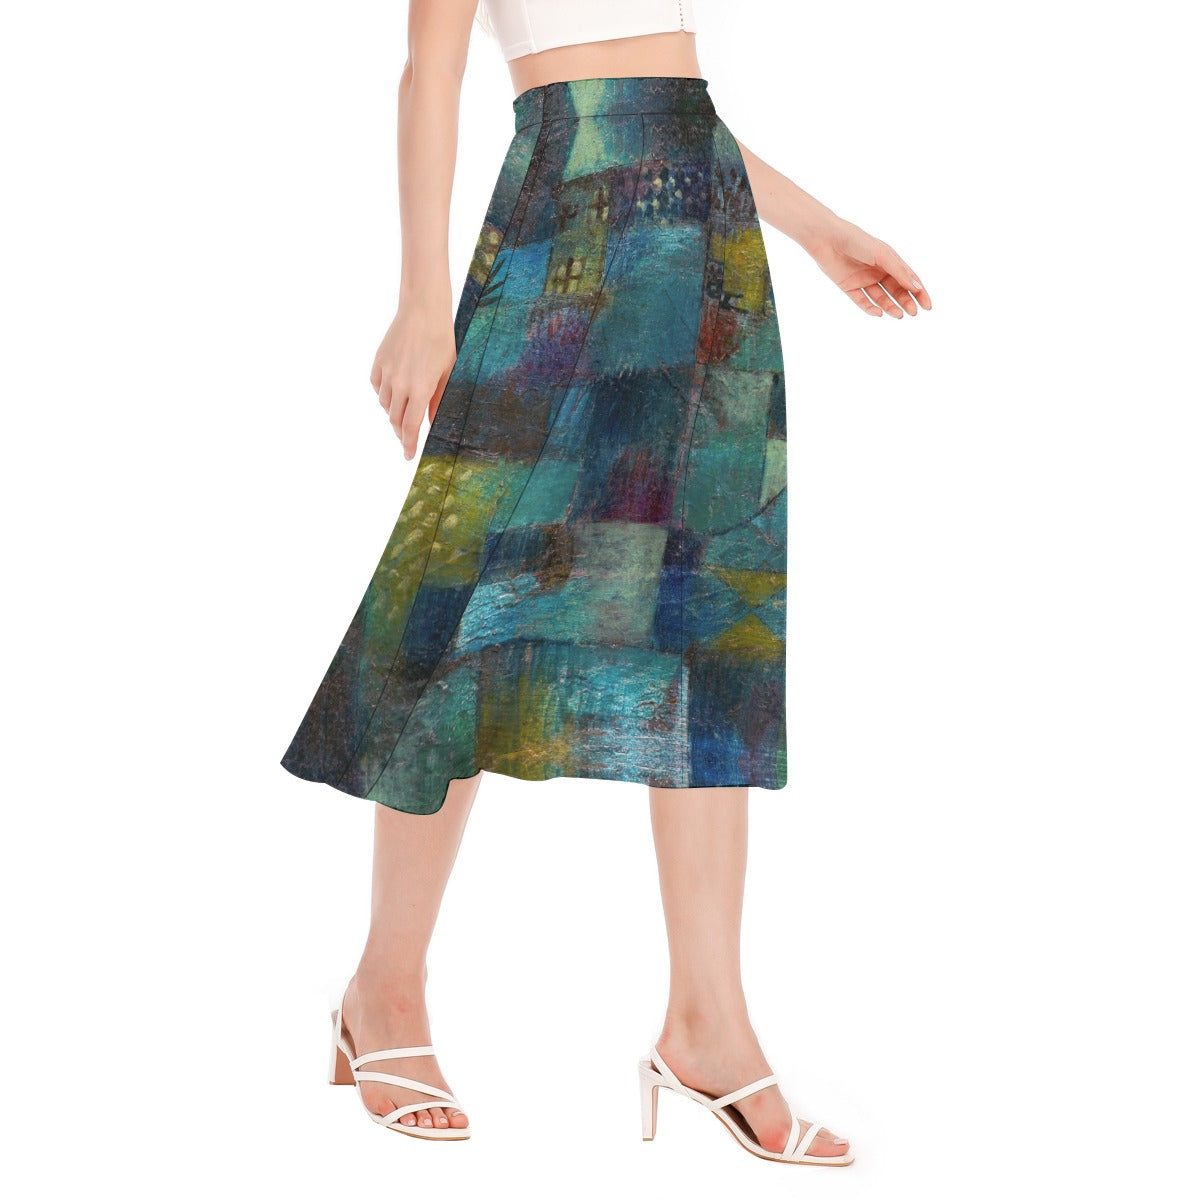 Dreamy chiffon skirt with vibrant colors and delicate design